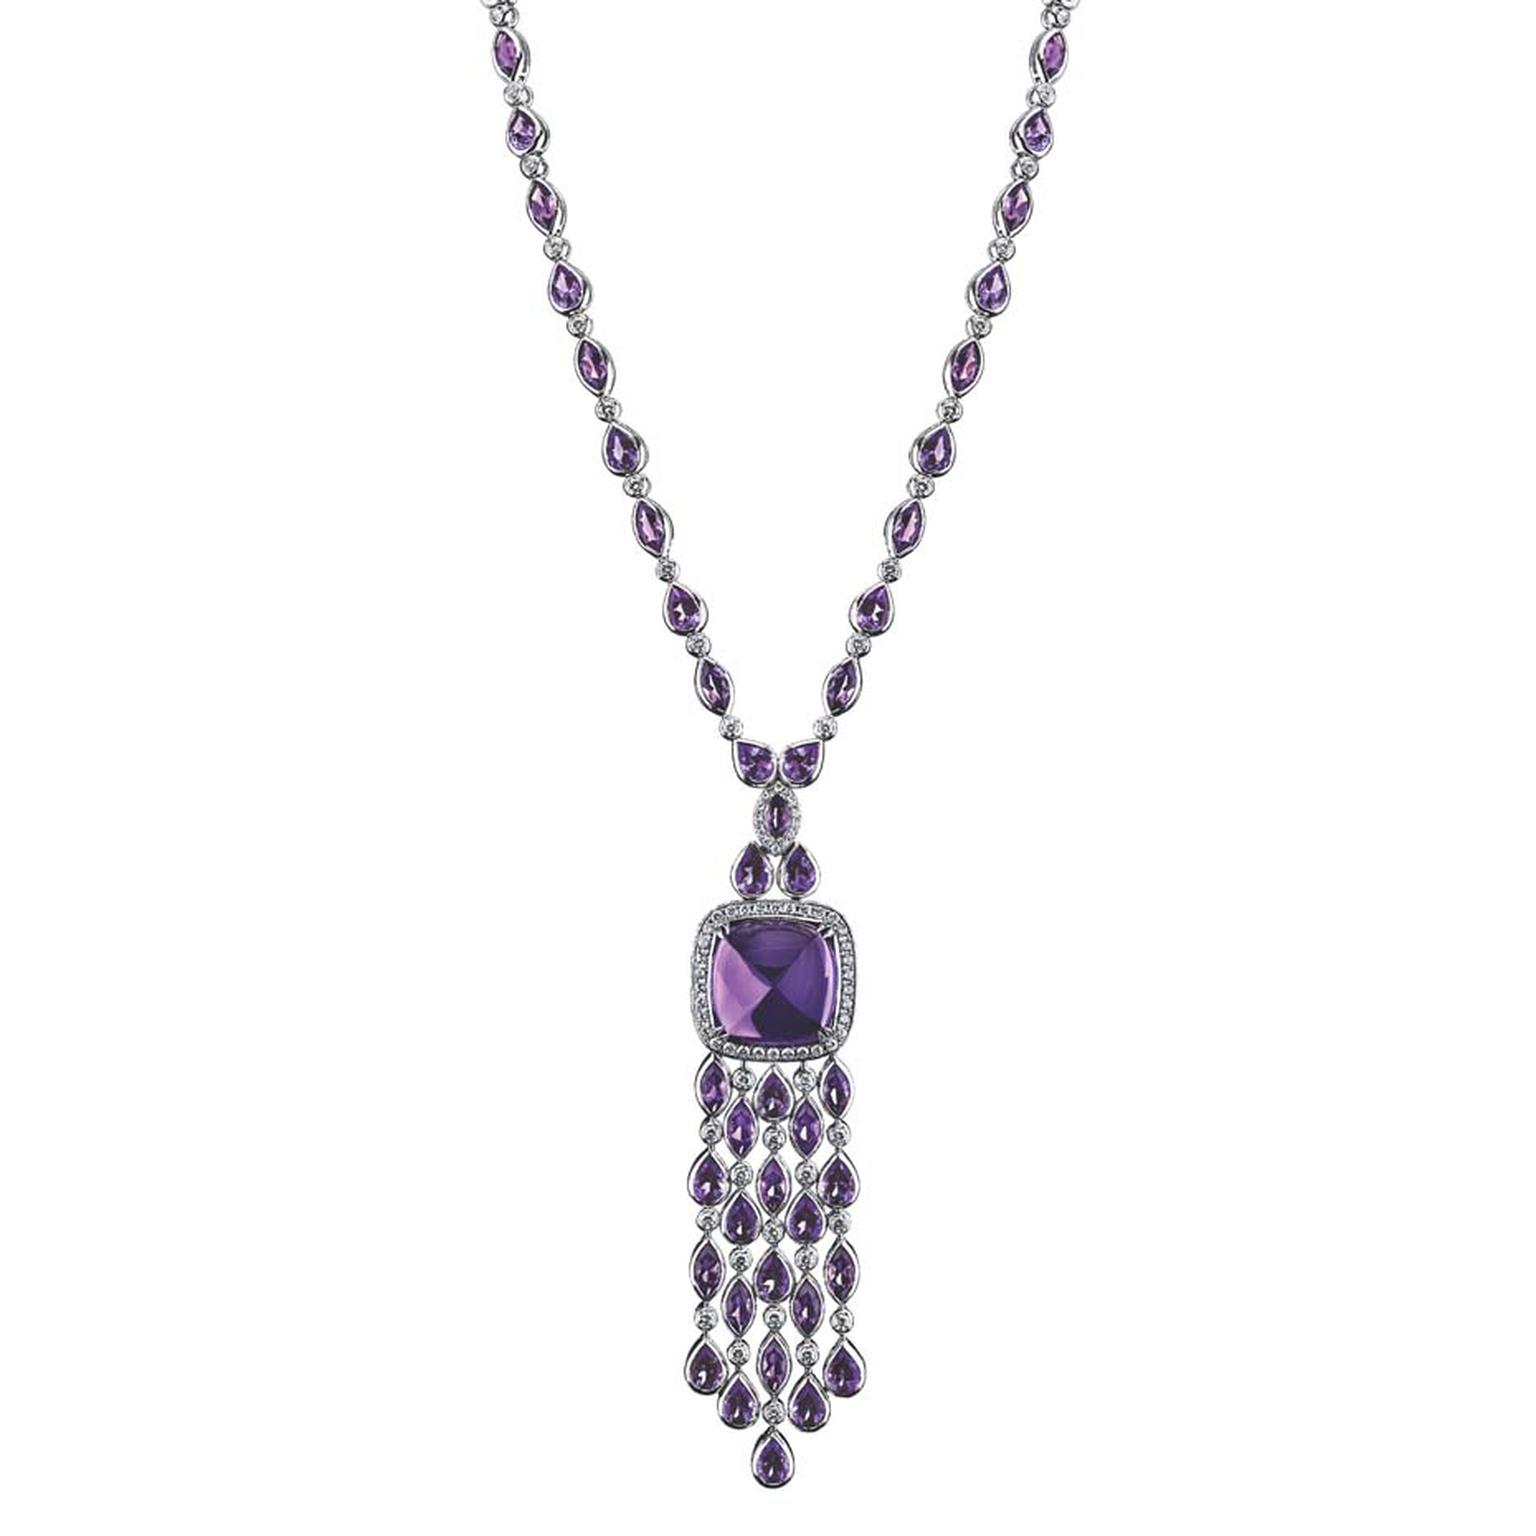 Robert Procop necklace in white gold, from the Legacy Brooke collection, featuring a 50.00ct amethyst and diamonds ($38,000).